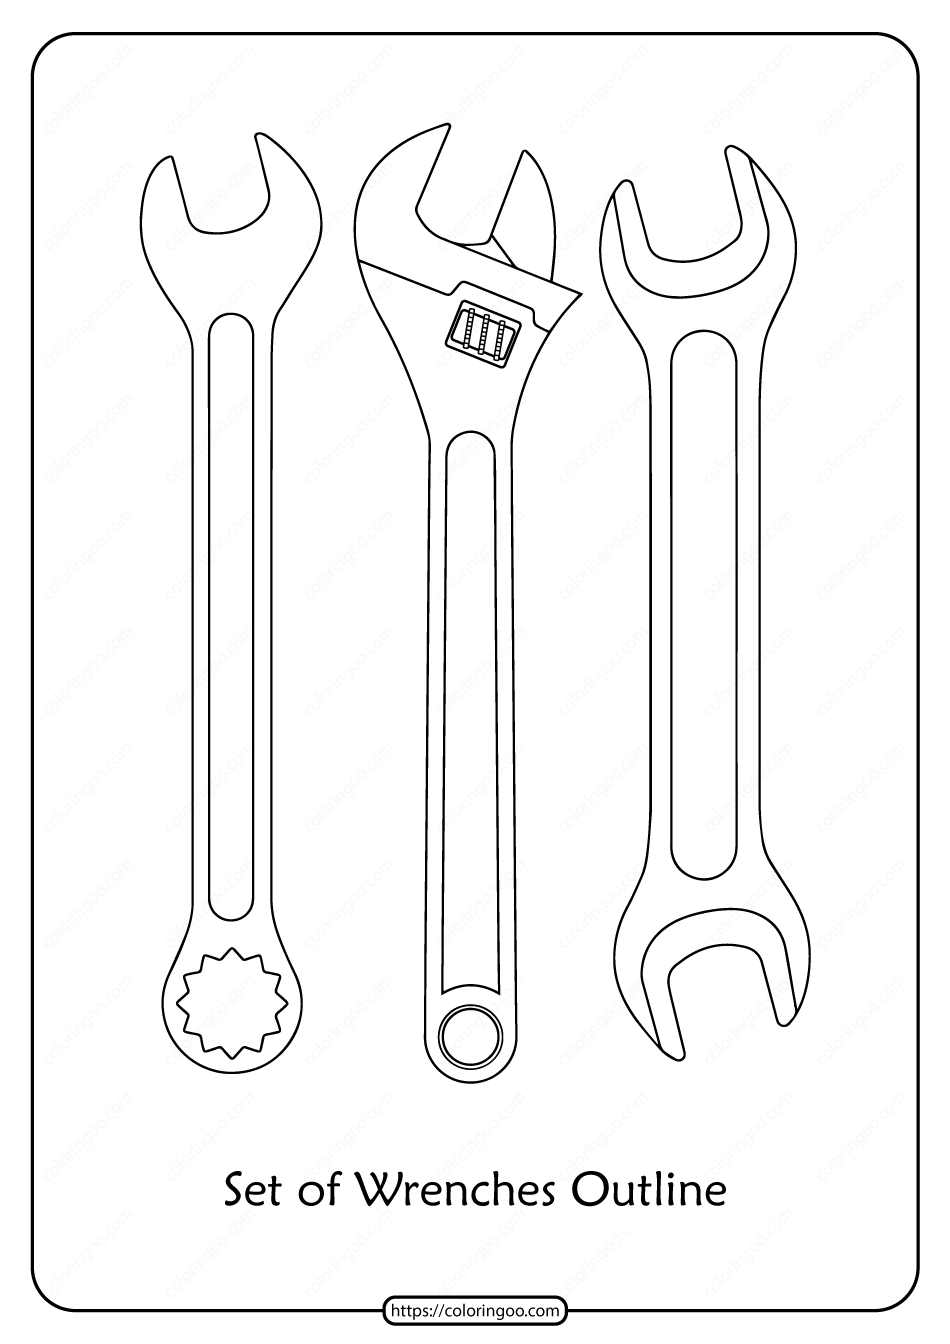 Free Printable Set of Wrenches Pdf Outline Icons